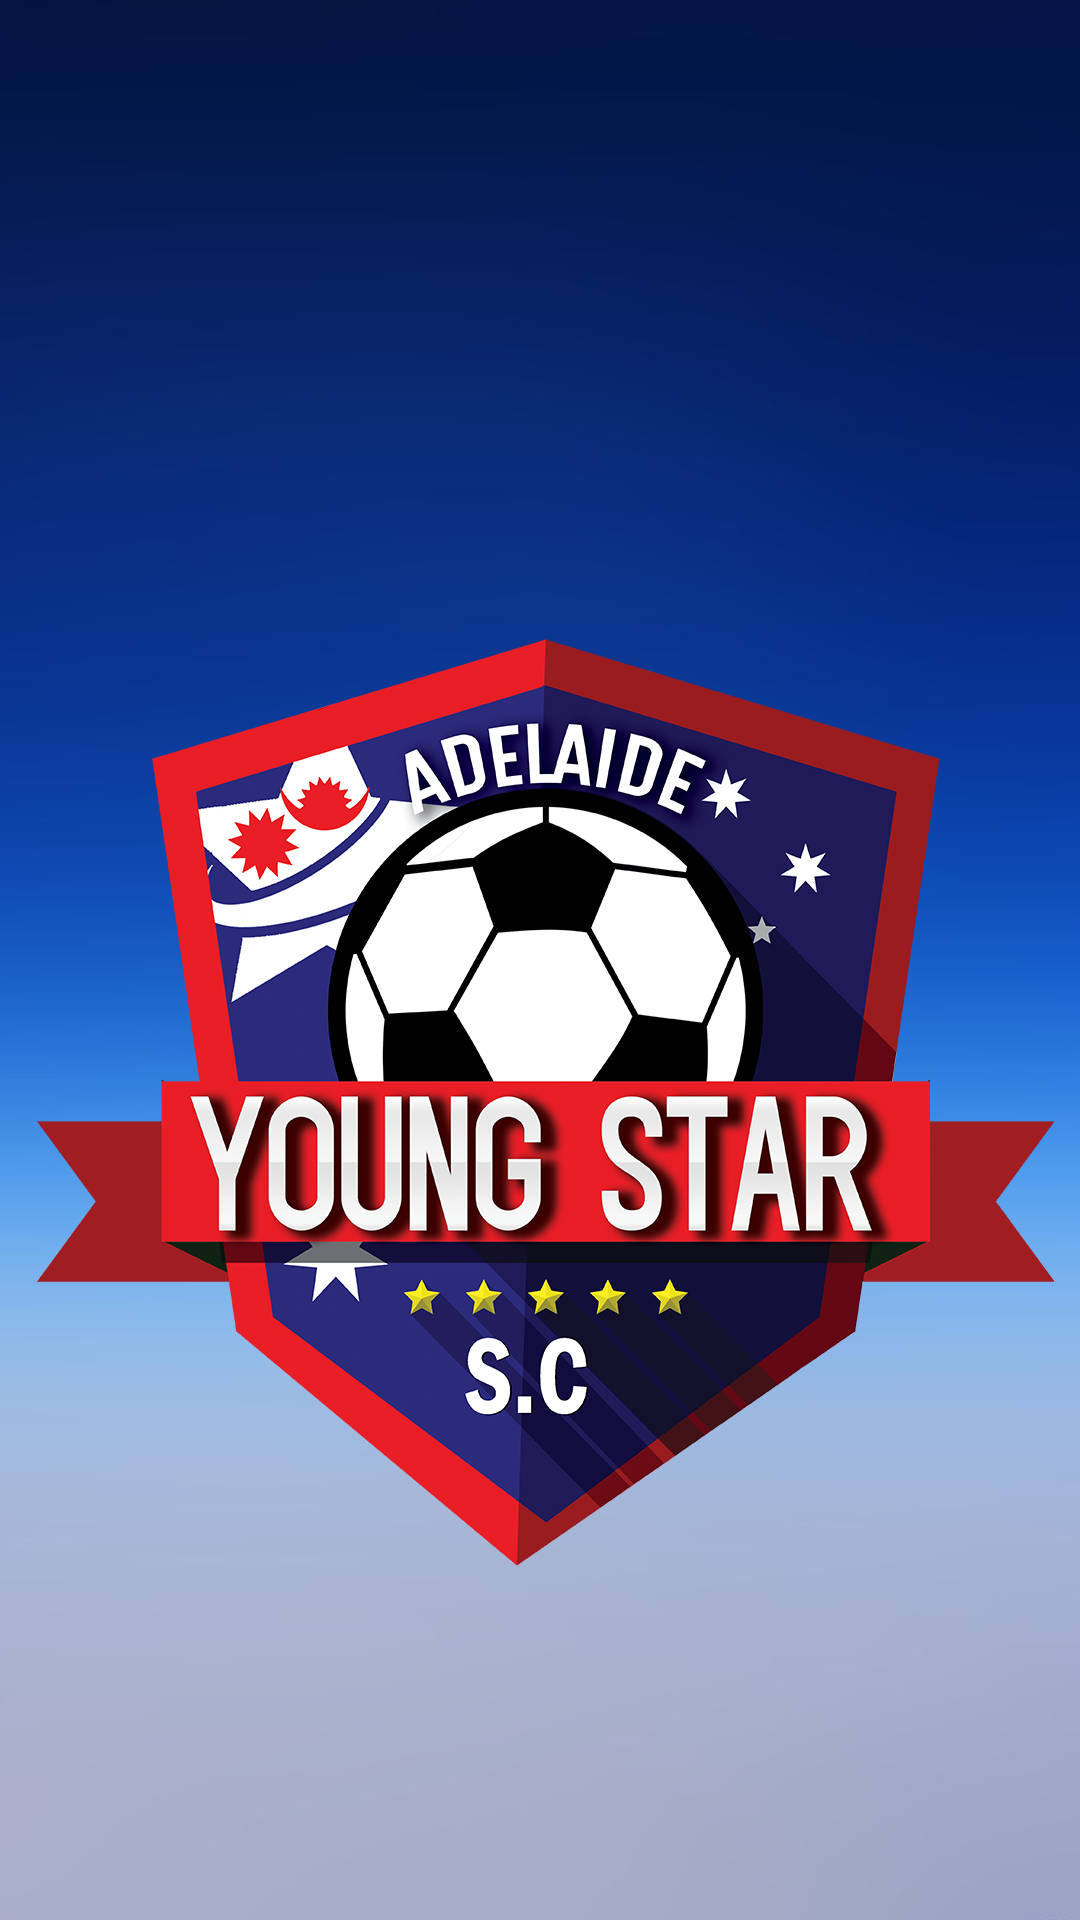 Adelaide Young Star Soccer Club